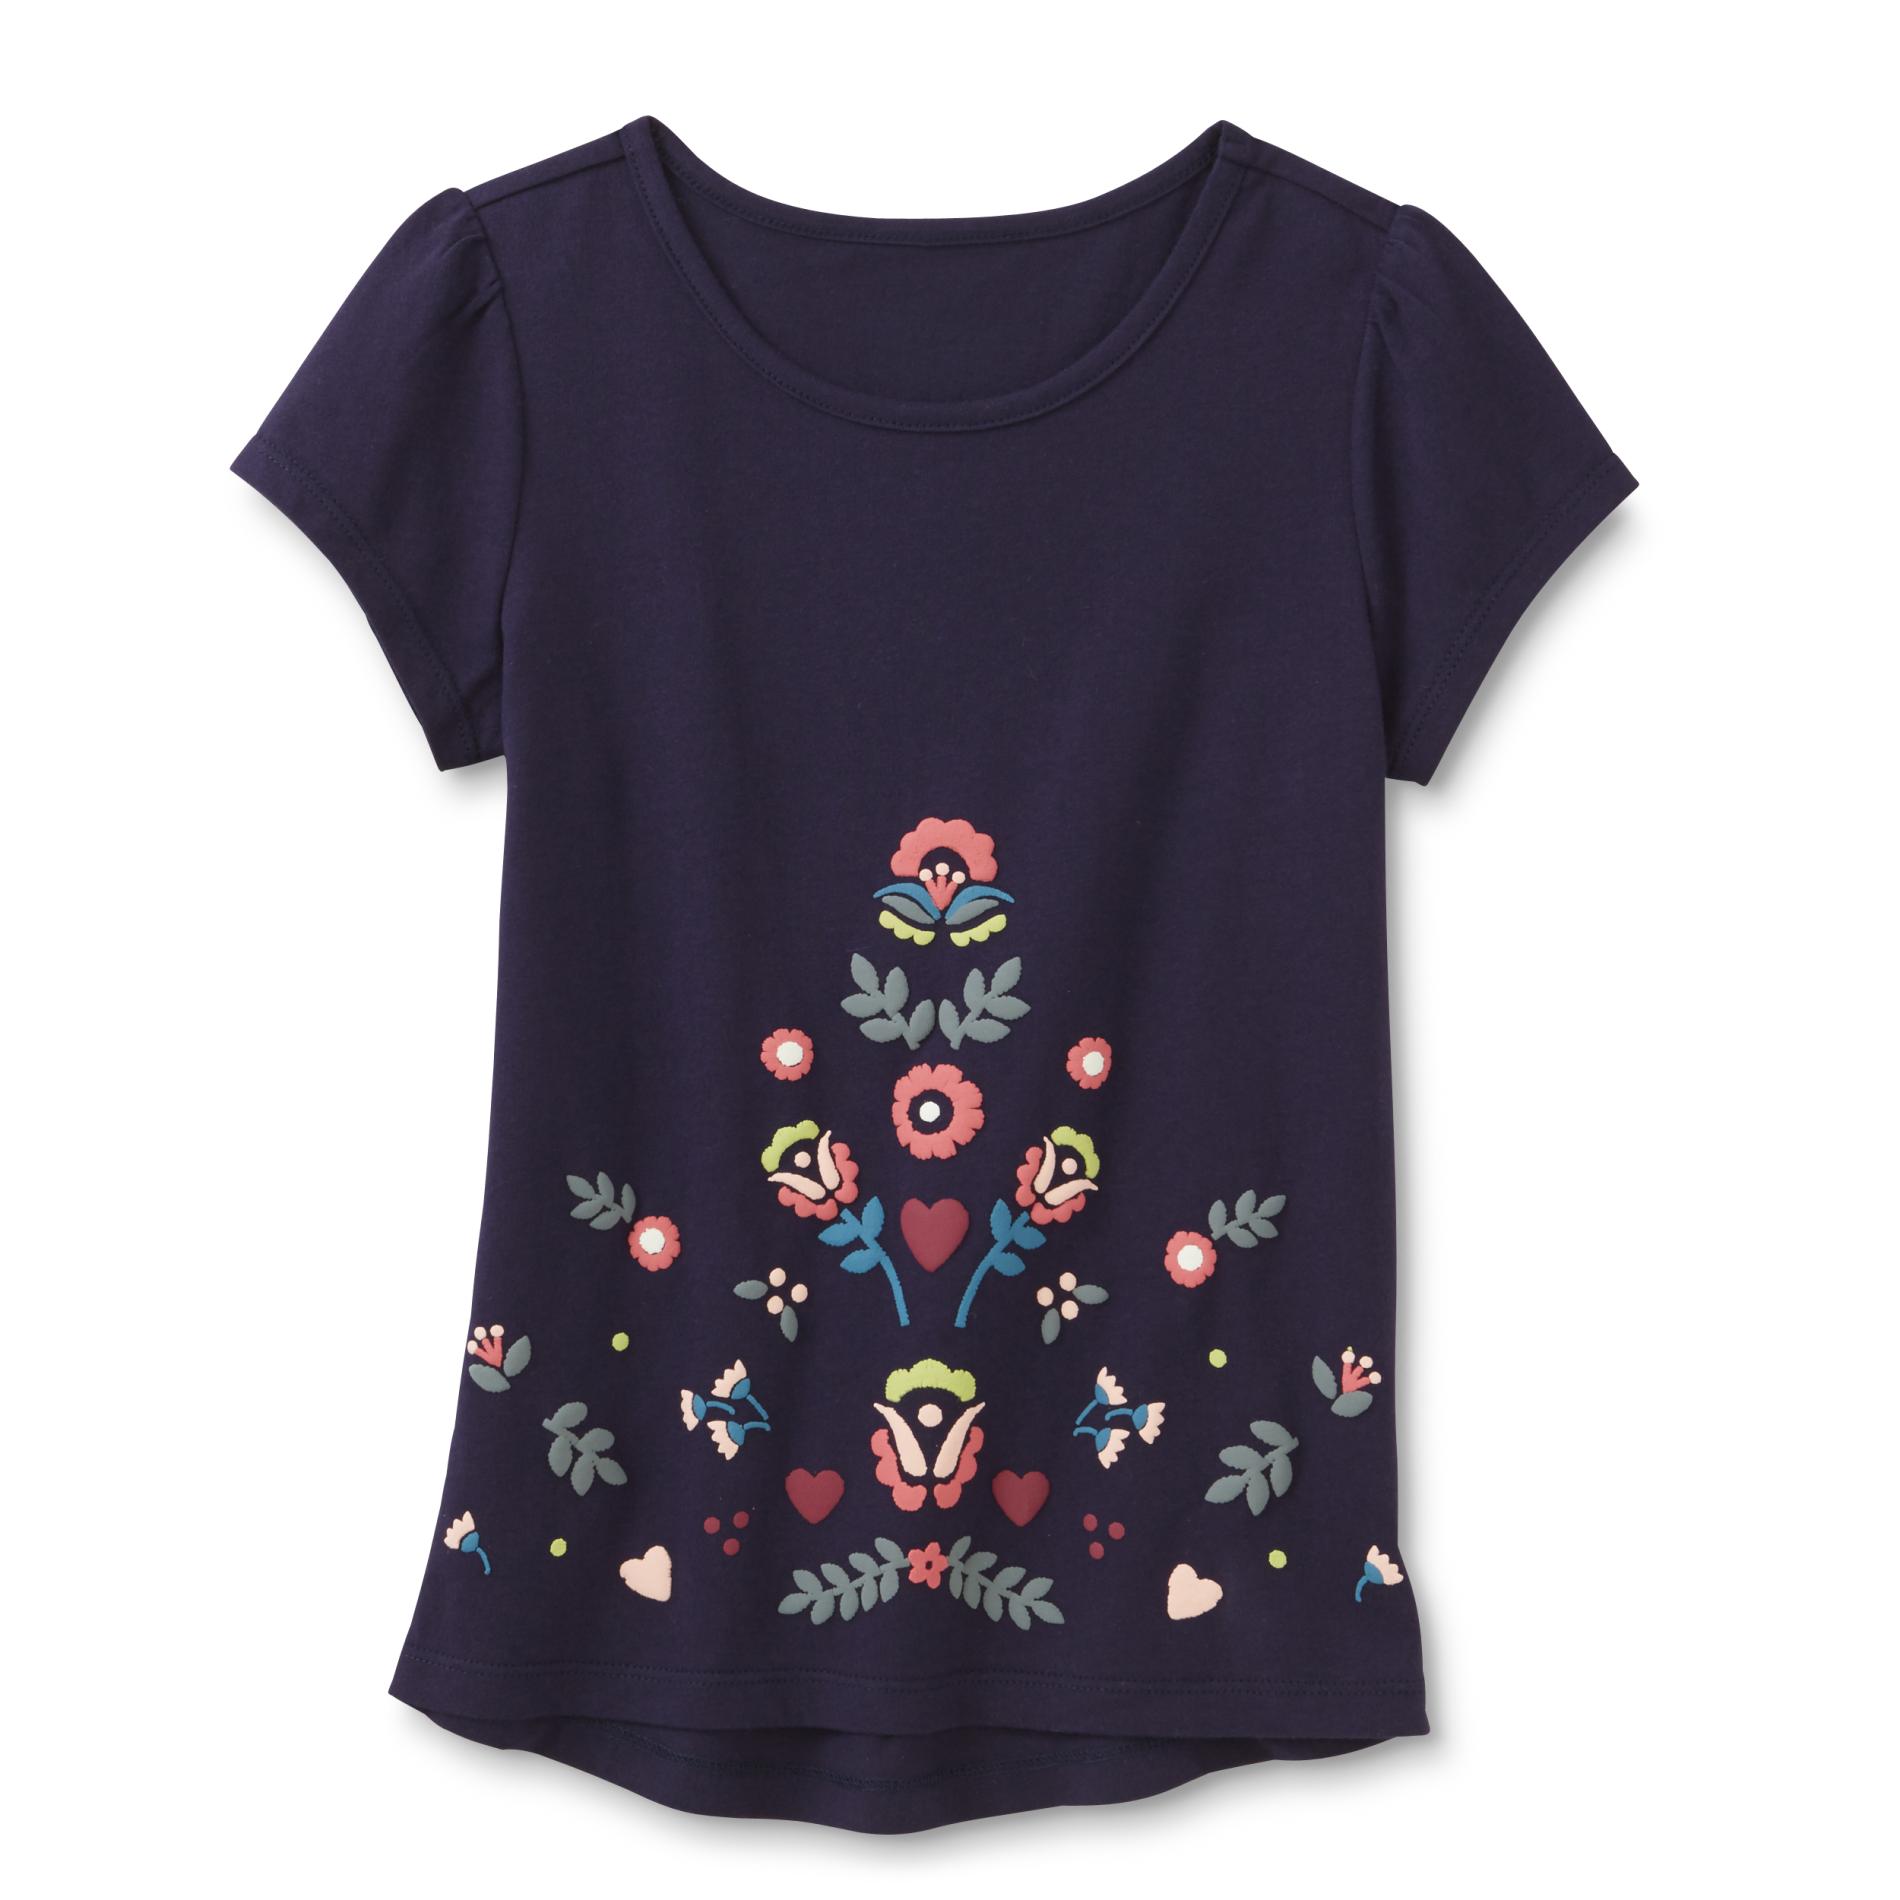 Toughskins Girl's Graphic T-Shirt - Floral